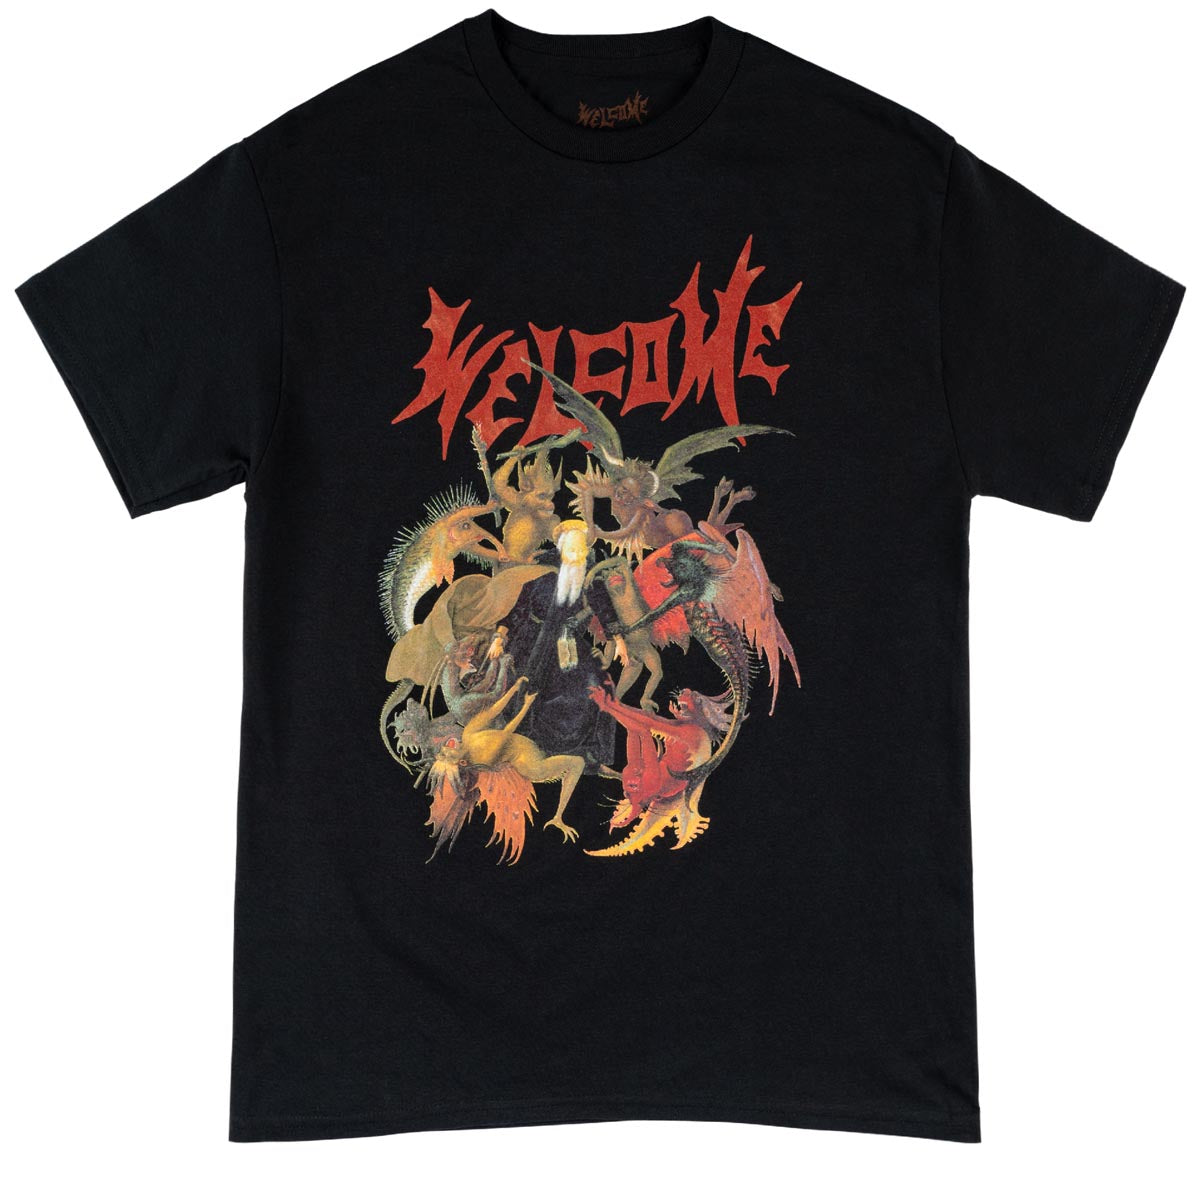 Welcome Torment T-Shirt - Black image 1